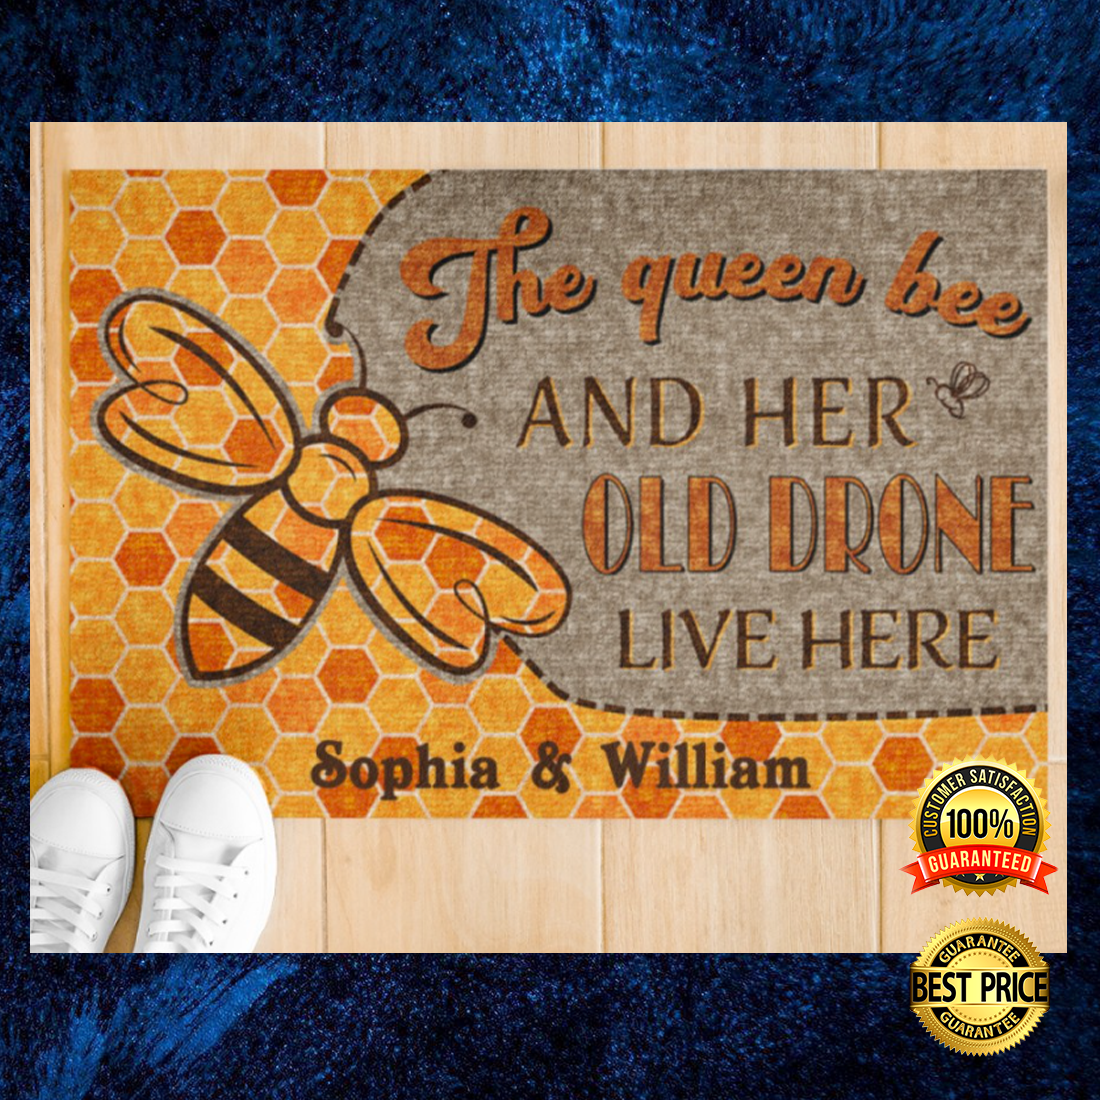 Personalized the queen bee and her old brone live here doormat 2